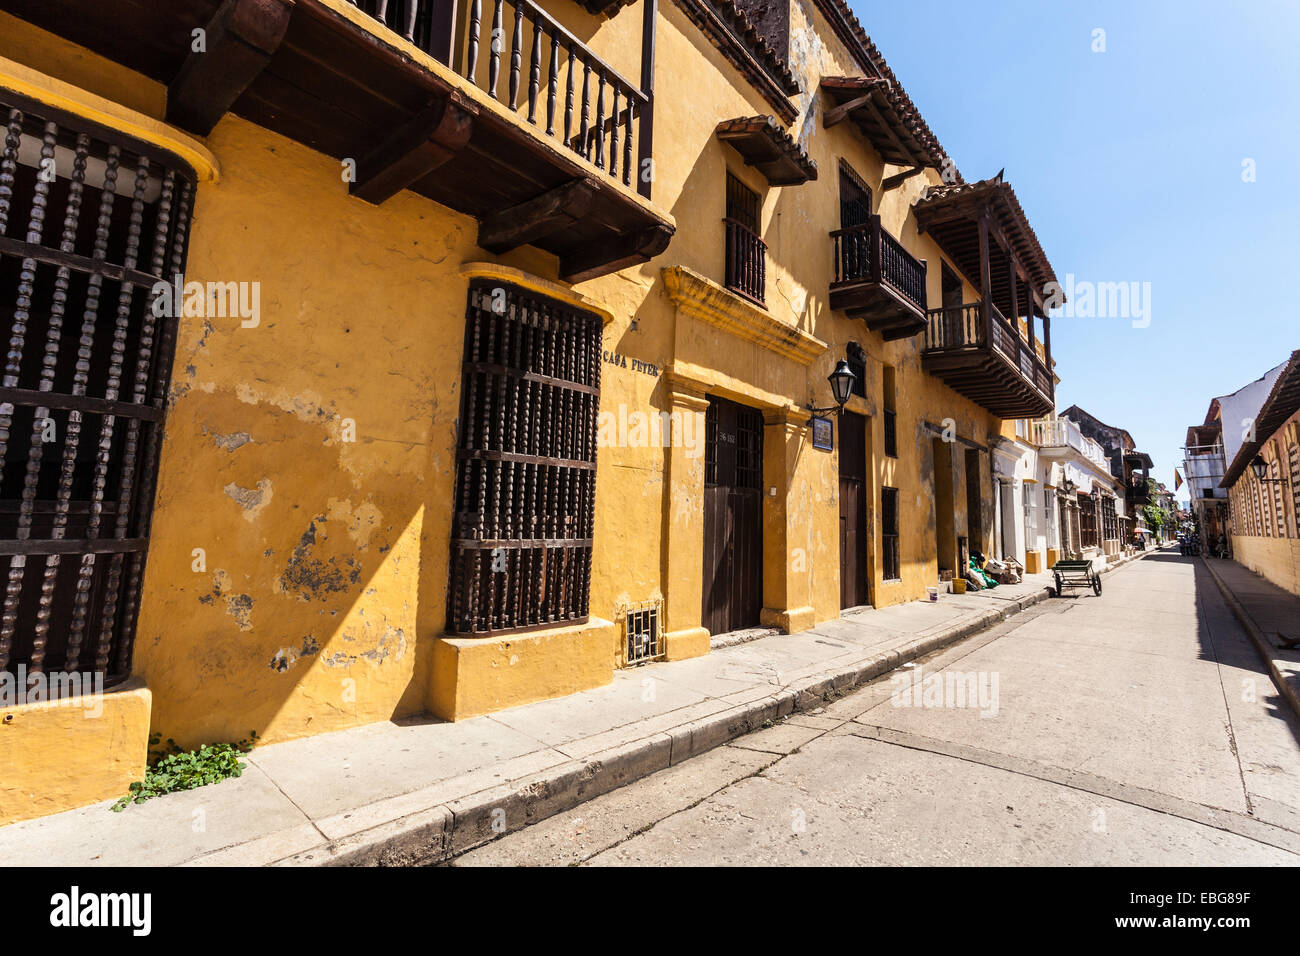 Spanish colonial architecture row of houses, Cartagena de Indias, Colombia. Stock Photo